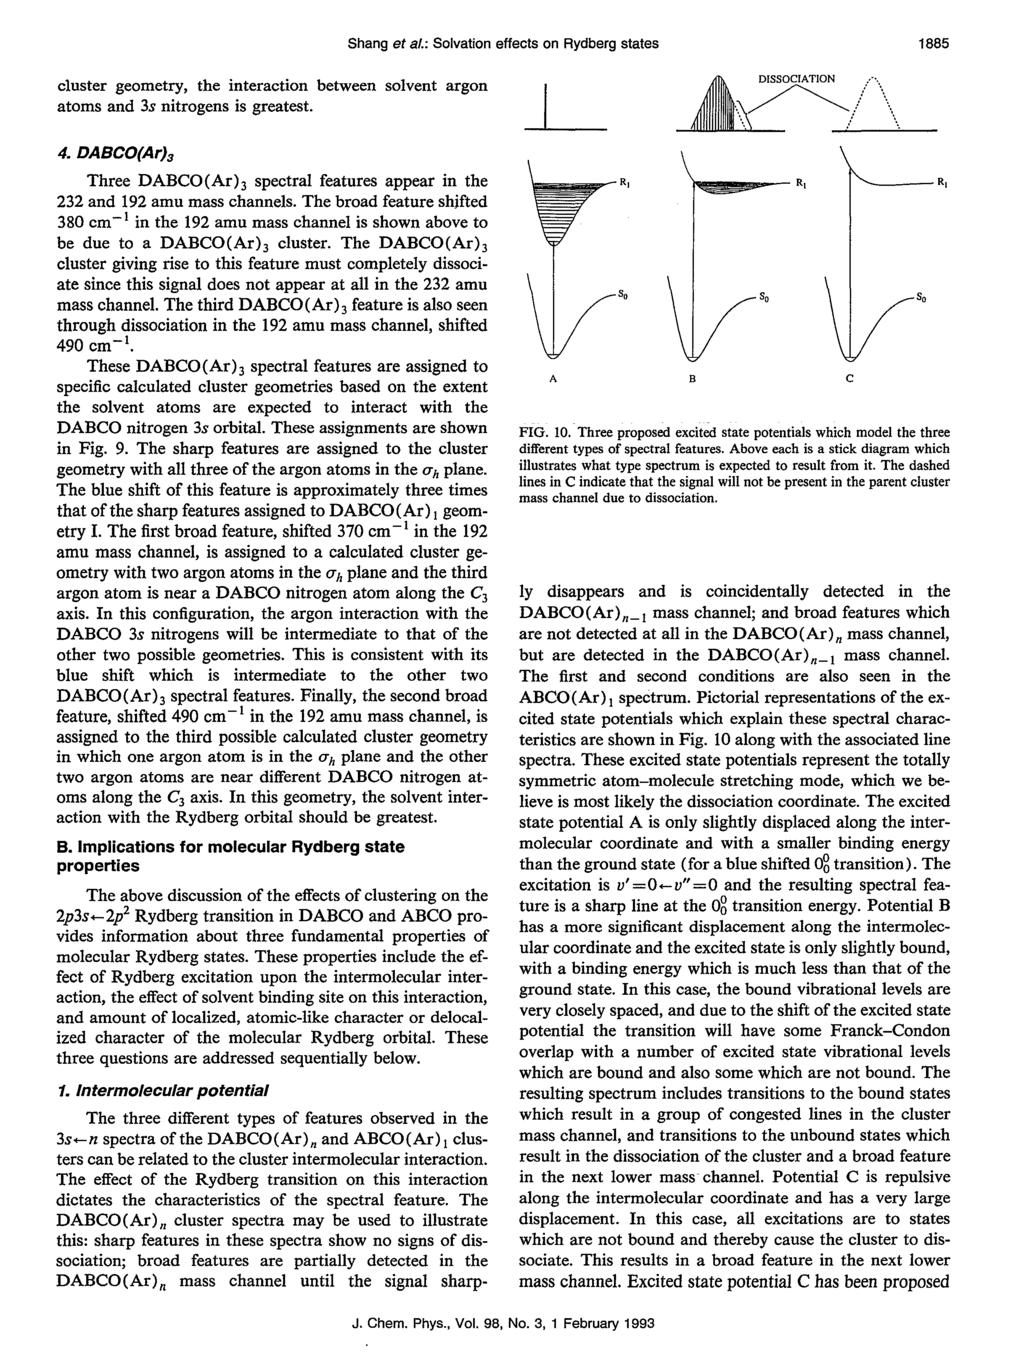 cluster geometry, the interaction between solvent argon atoms and 3s nitrogens is greatest. Shang et sl.: Solvation effects on Rydberg states 1885 4.